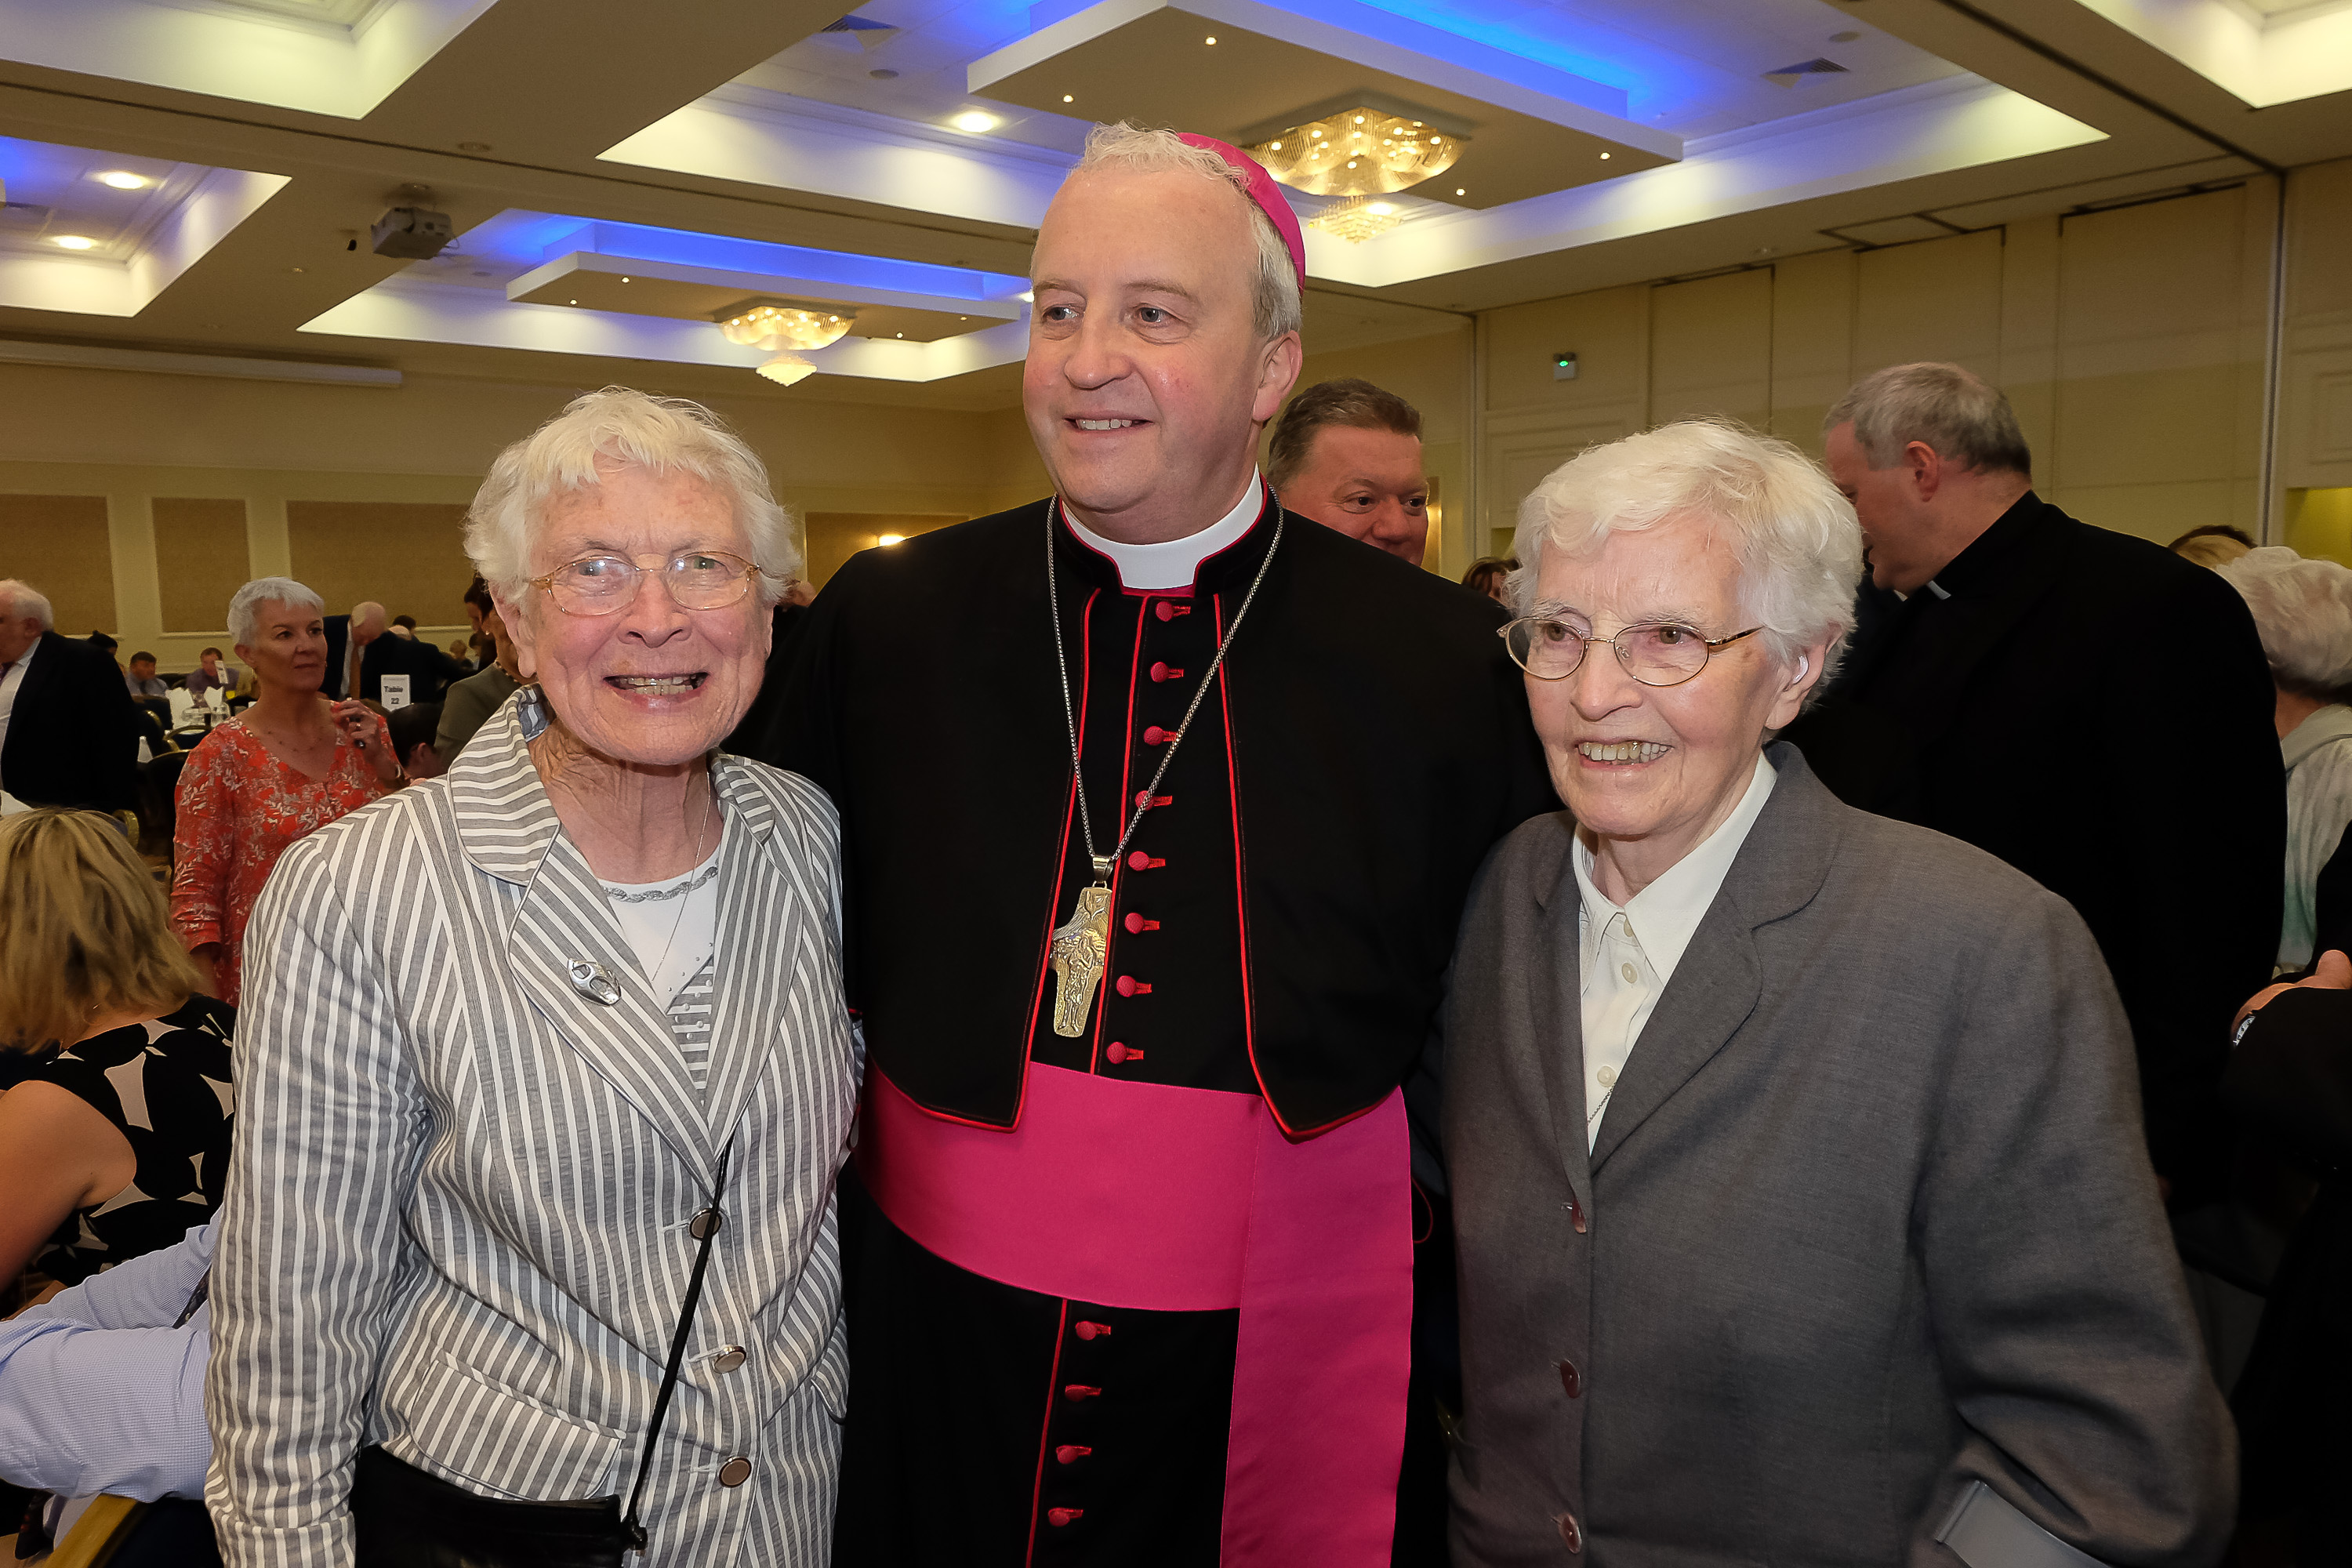 Sr Veronica, cousin of Bishop Michael, with the new Bishop Michael Router at a celebration dinner following the Bishop's Ordination Armagh City Hotel, Armagh,  21 July 2019Credit: LiamMcArdle.com